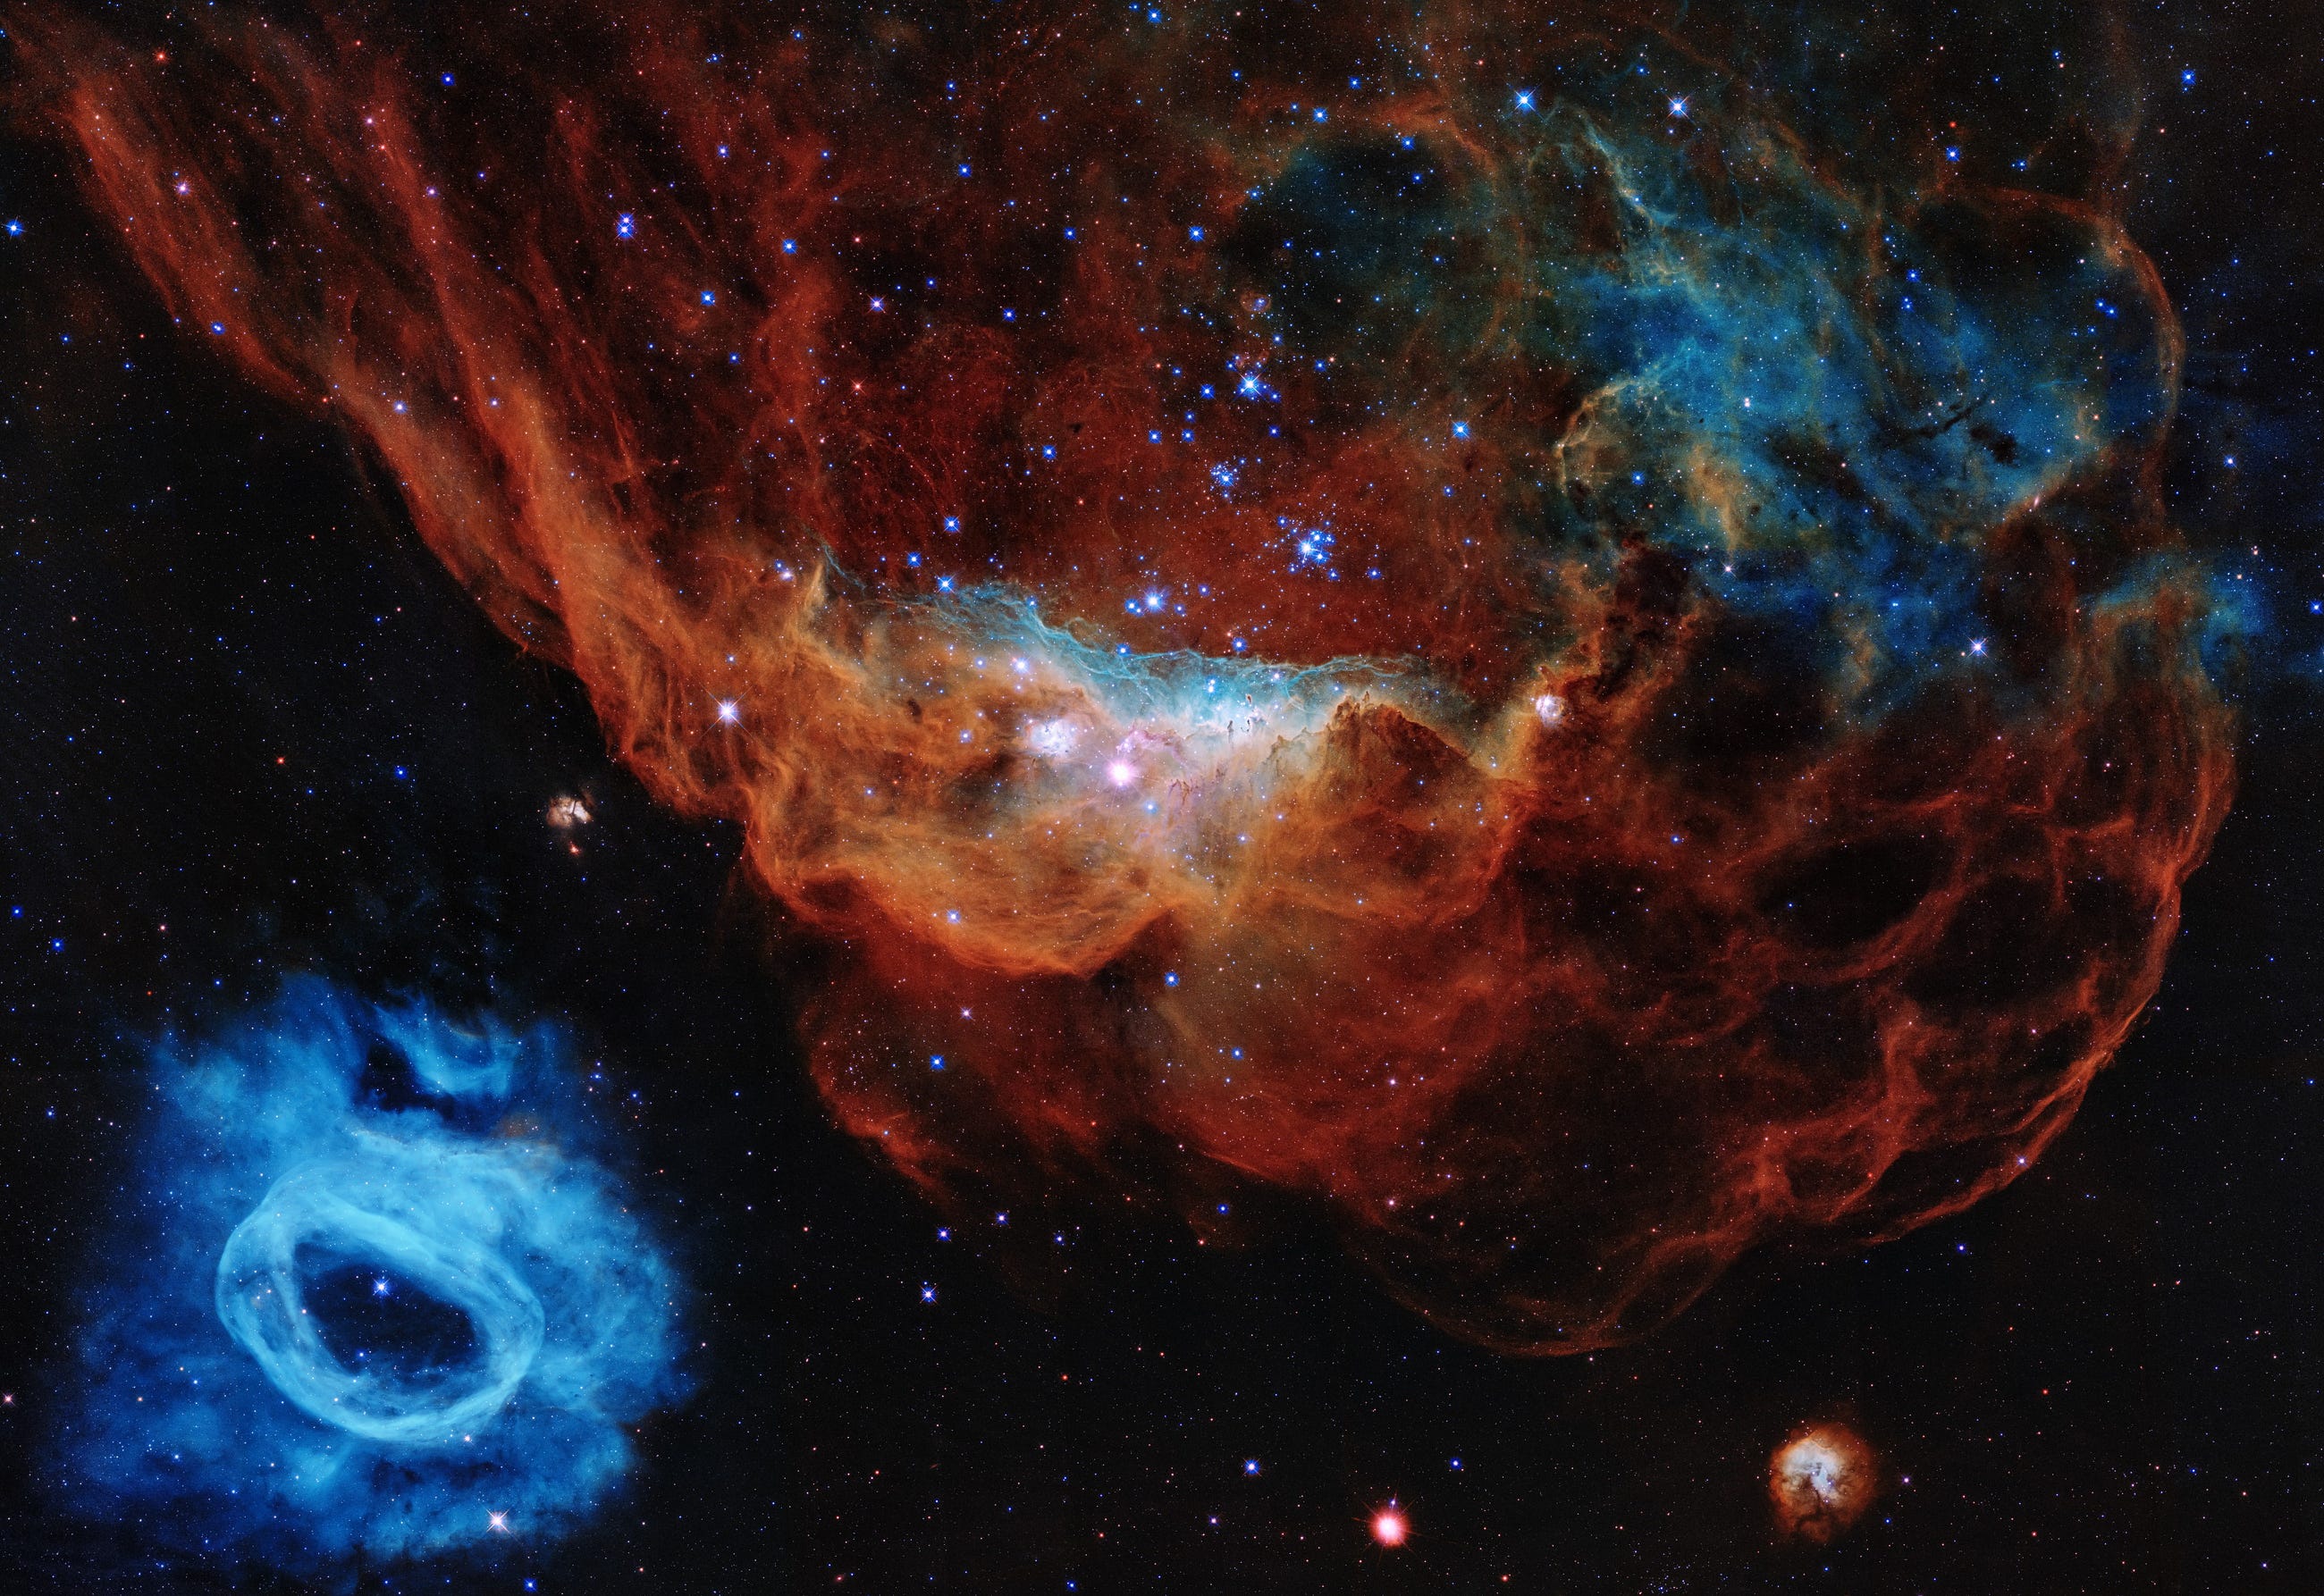 See Hubble’s most beautiful star-forming image ever